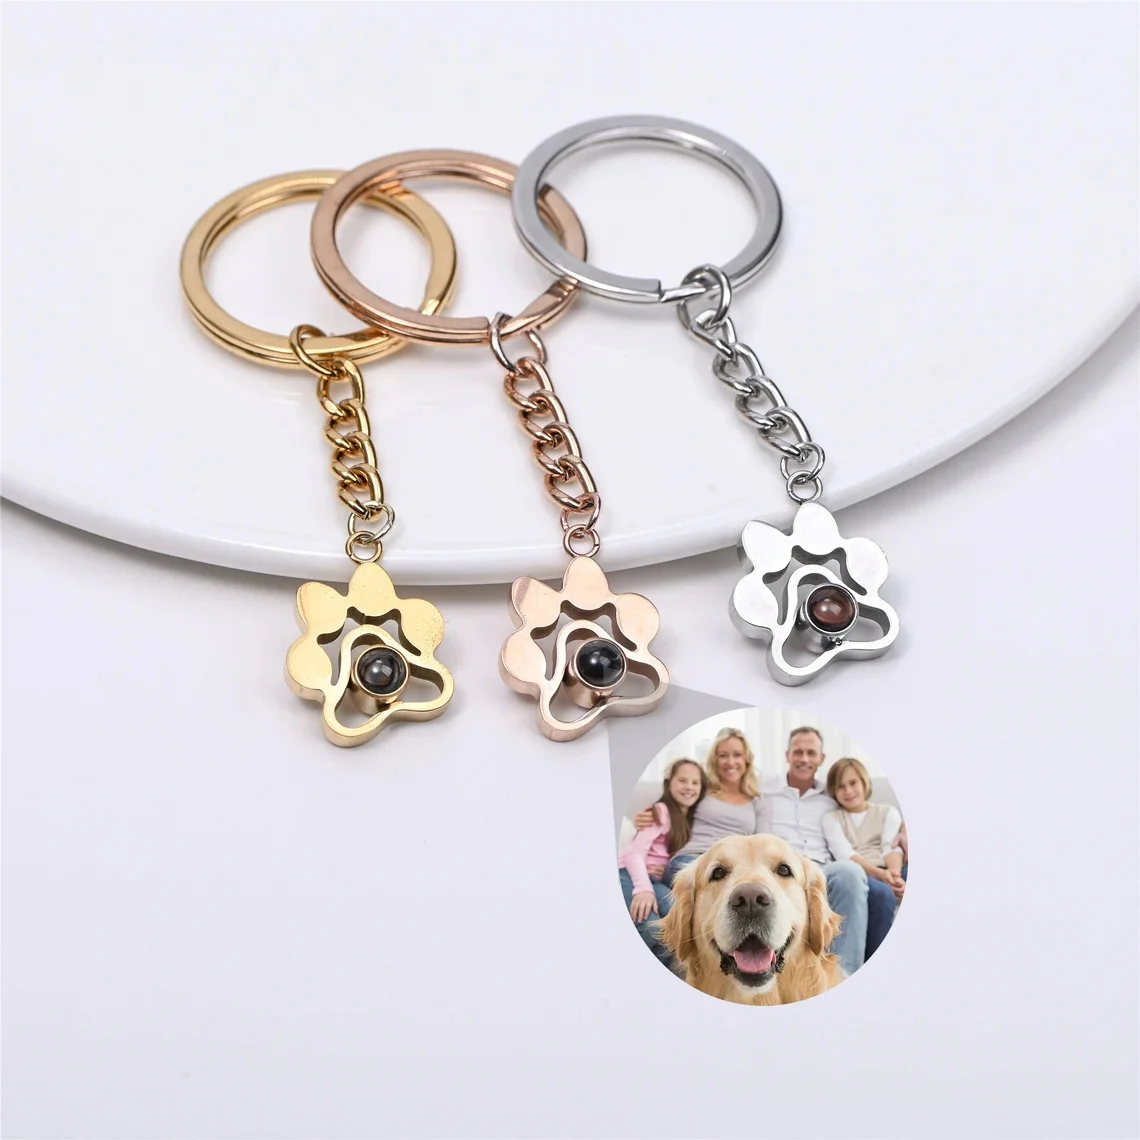 Personalized Customized Photo Projection Keychain Dog Paw Pendant Keychain With Picture Inside Stainless Steel Jewelry Gifts